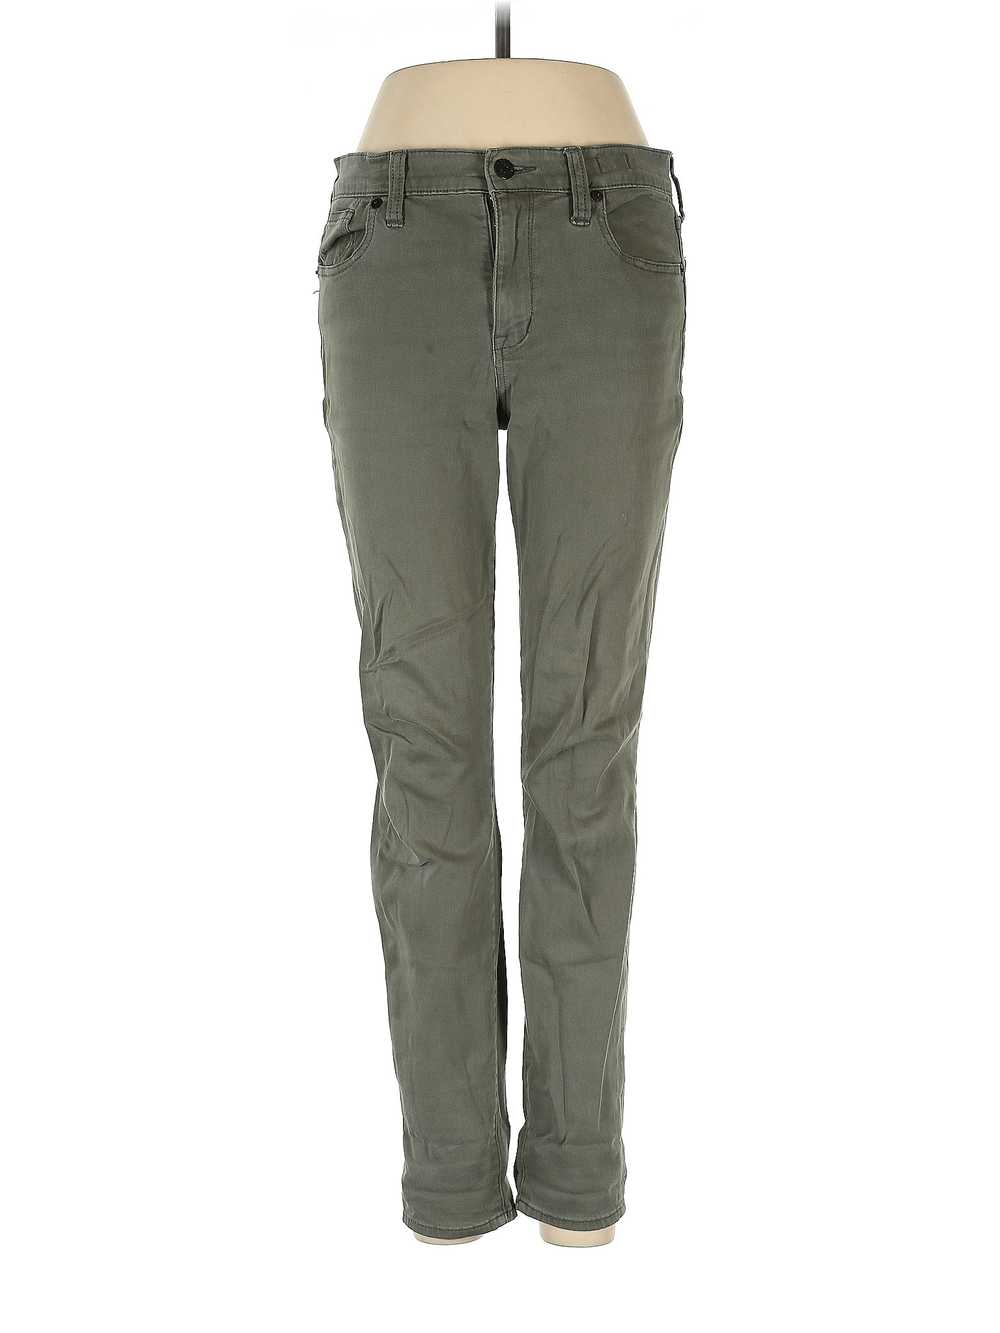 Madewell Women Green Jeans 28W - image 1